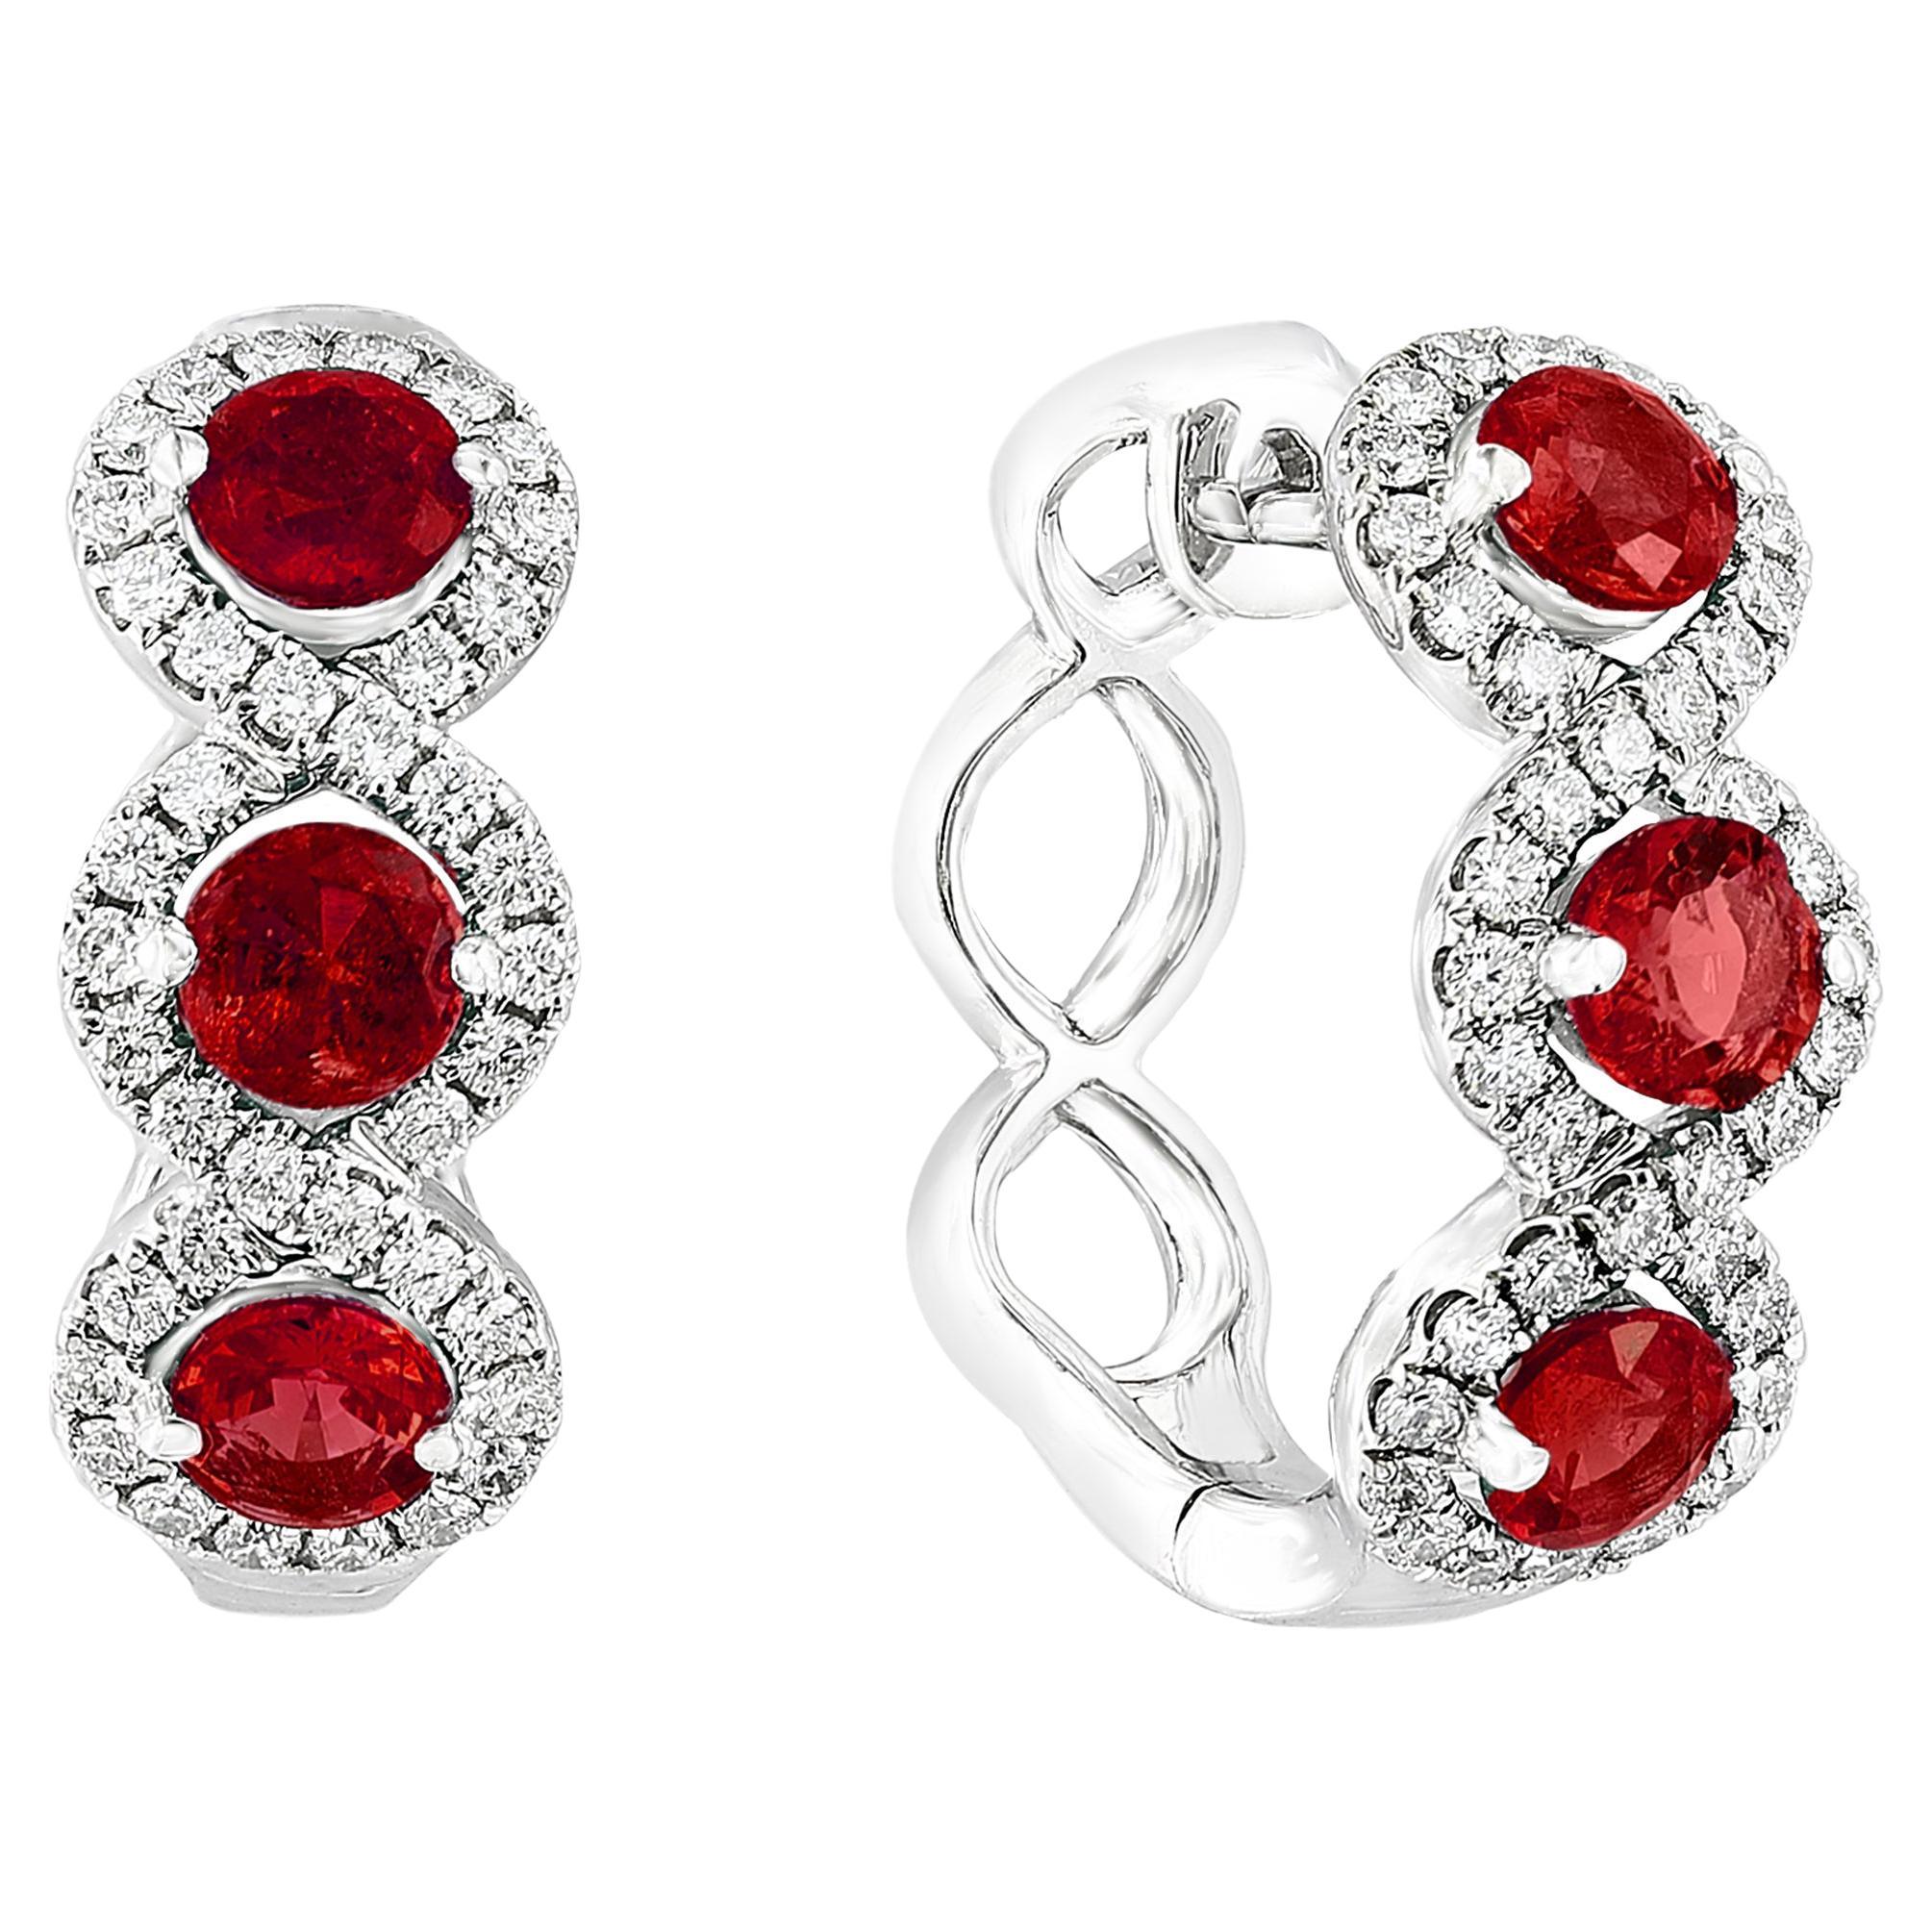 1.68 Carat Round Cut Ruby and Diamond Hoop Earrings in 18K White Gold For Sale